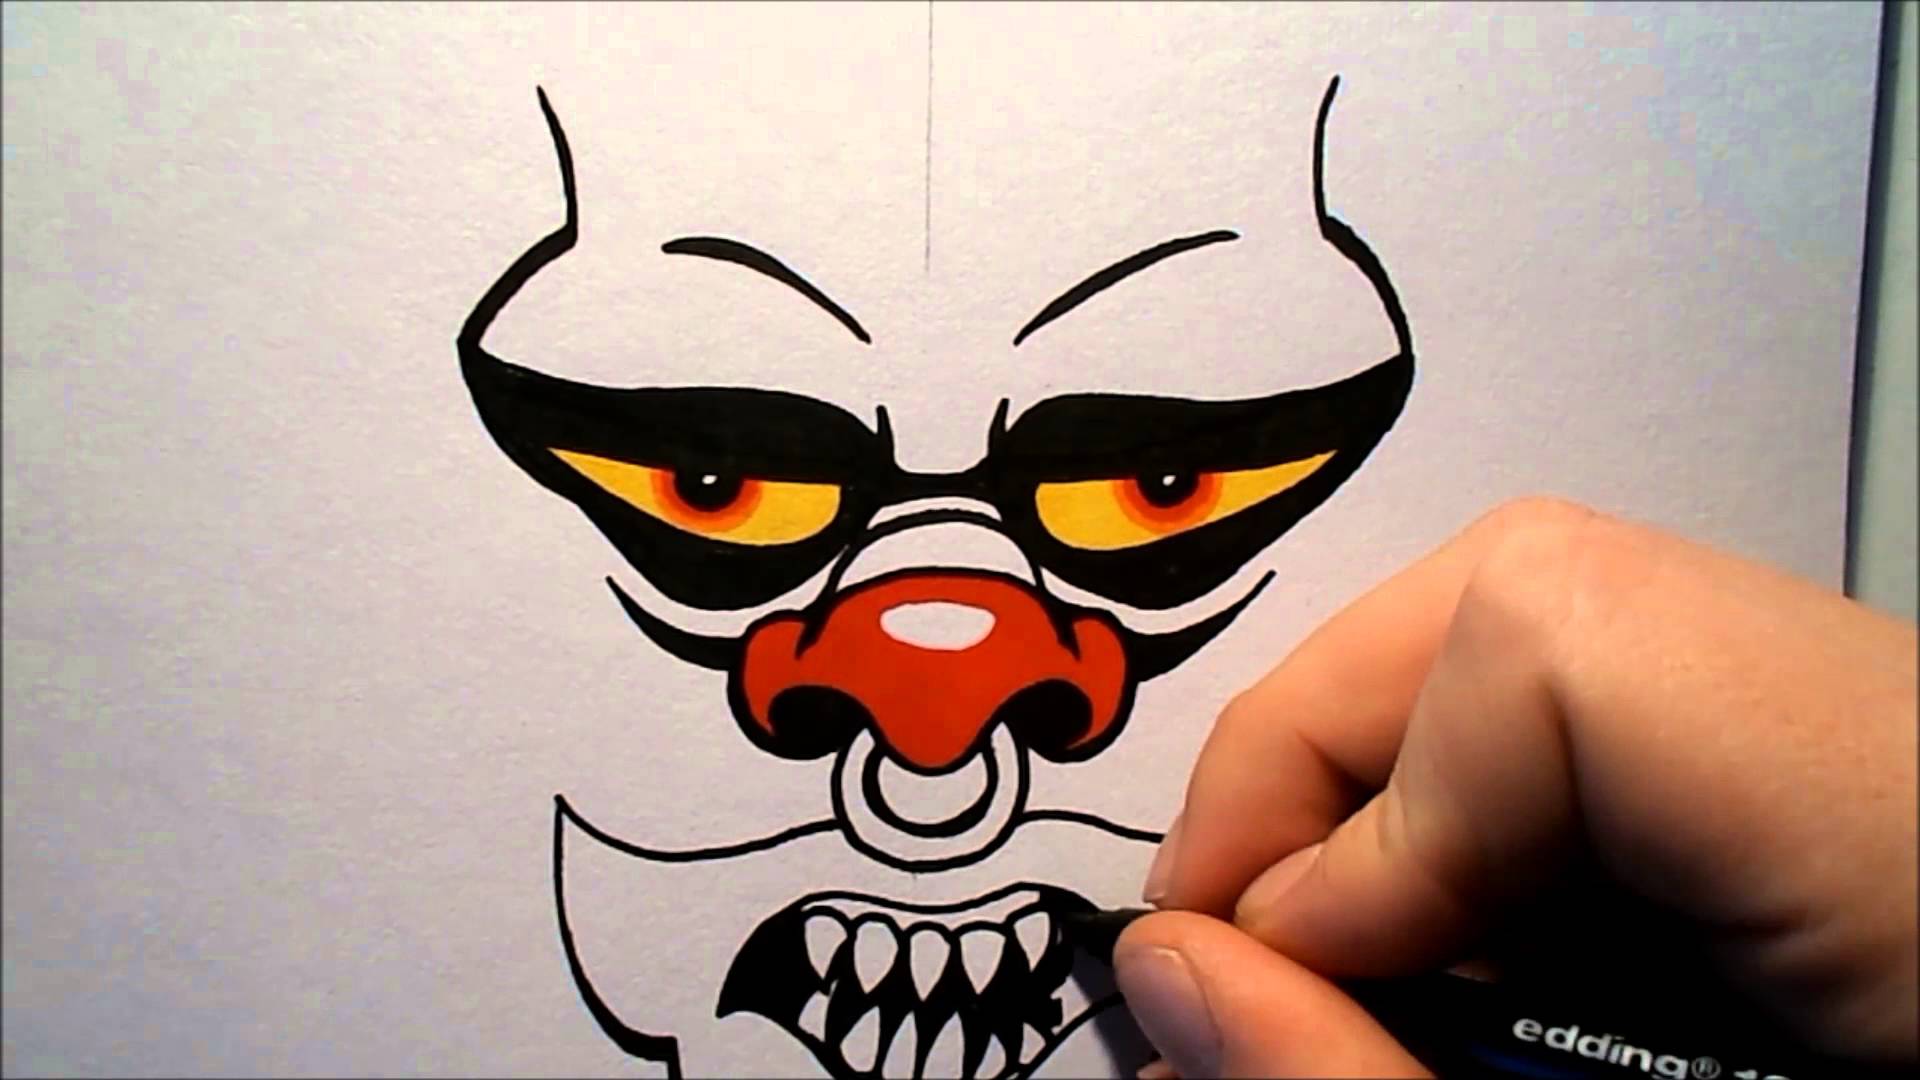 Amazing How To Draw A Scary Clown of the decade Check it out now 